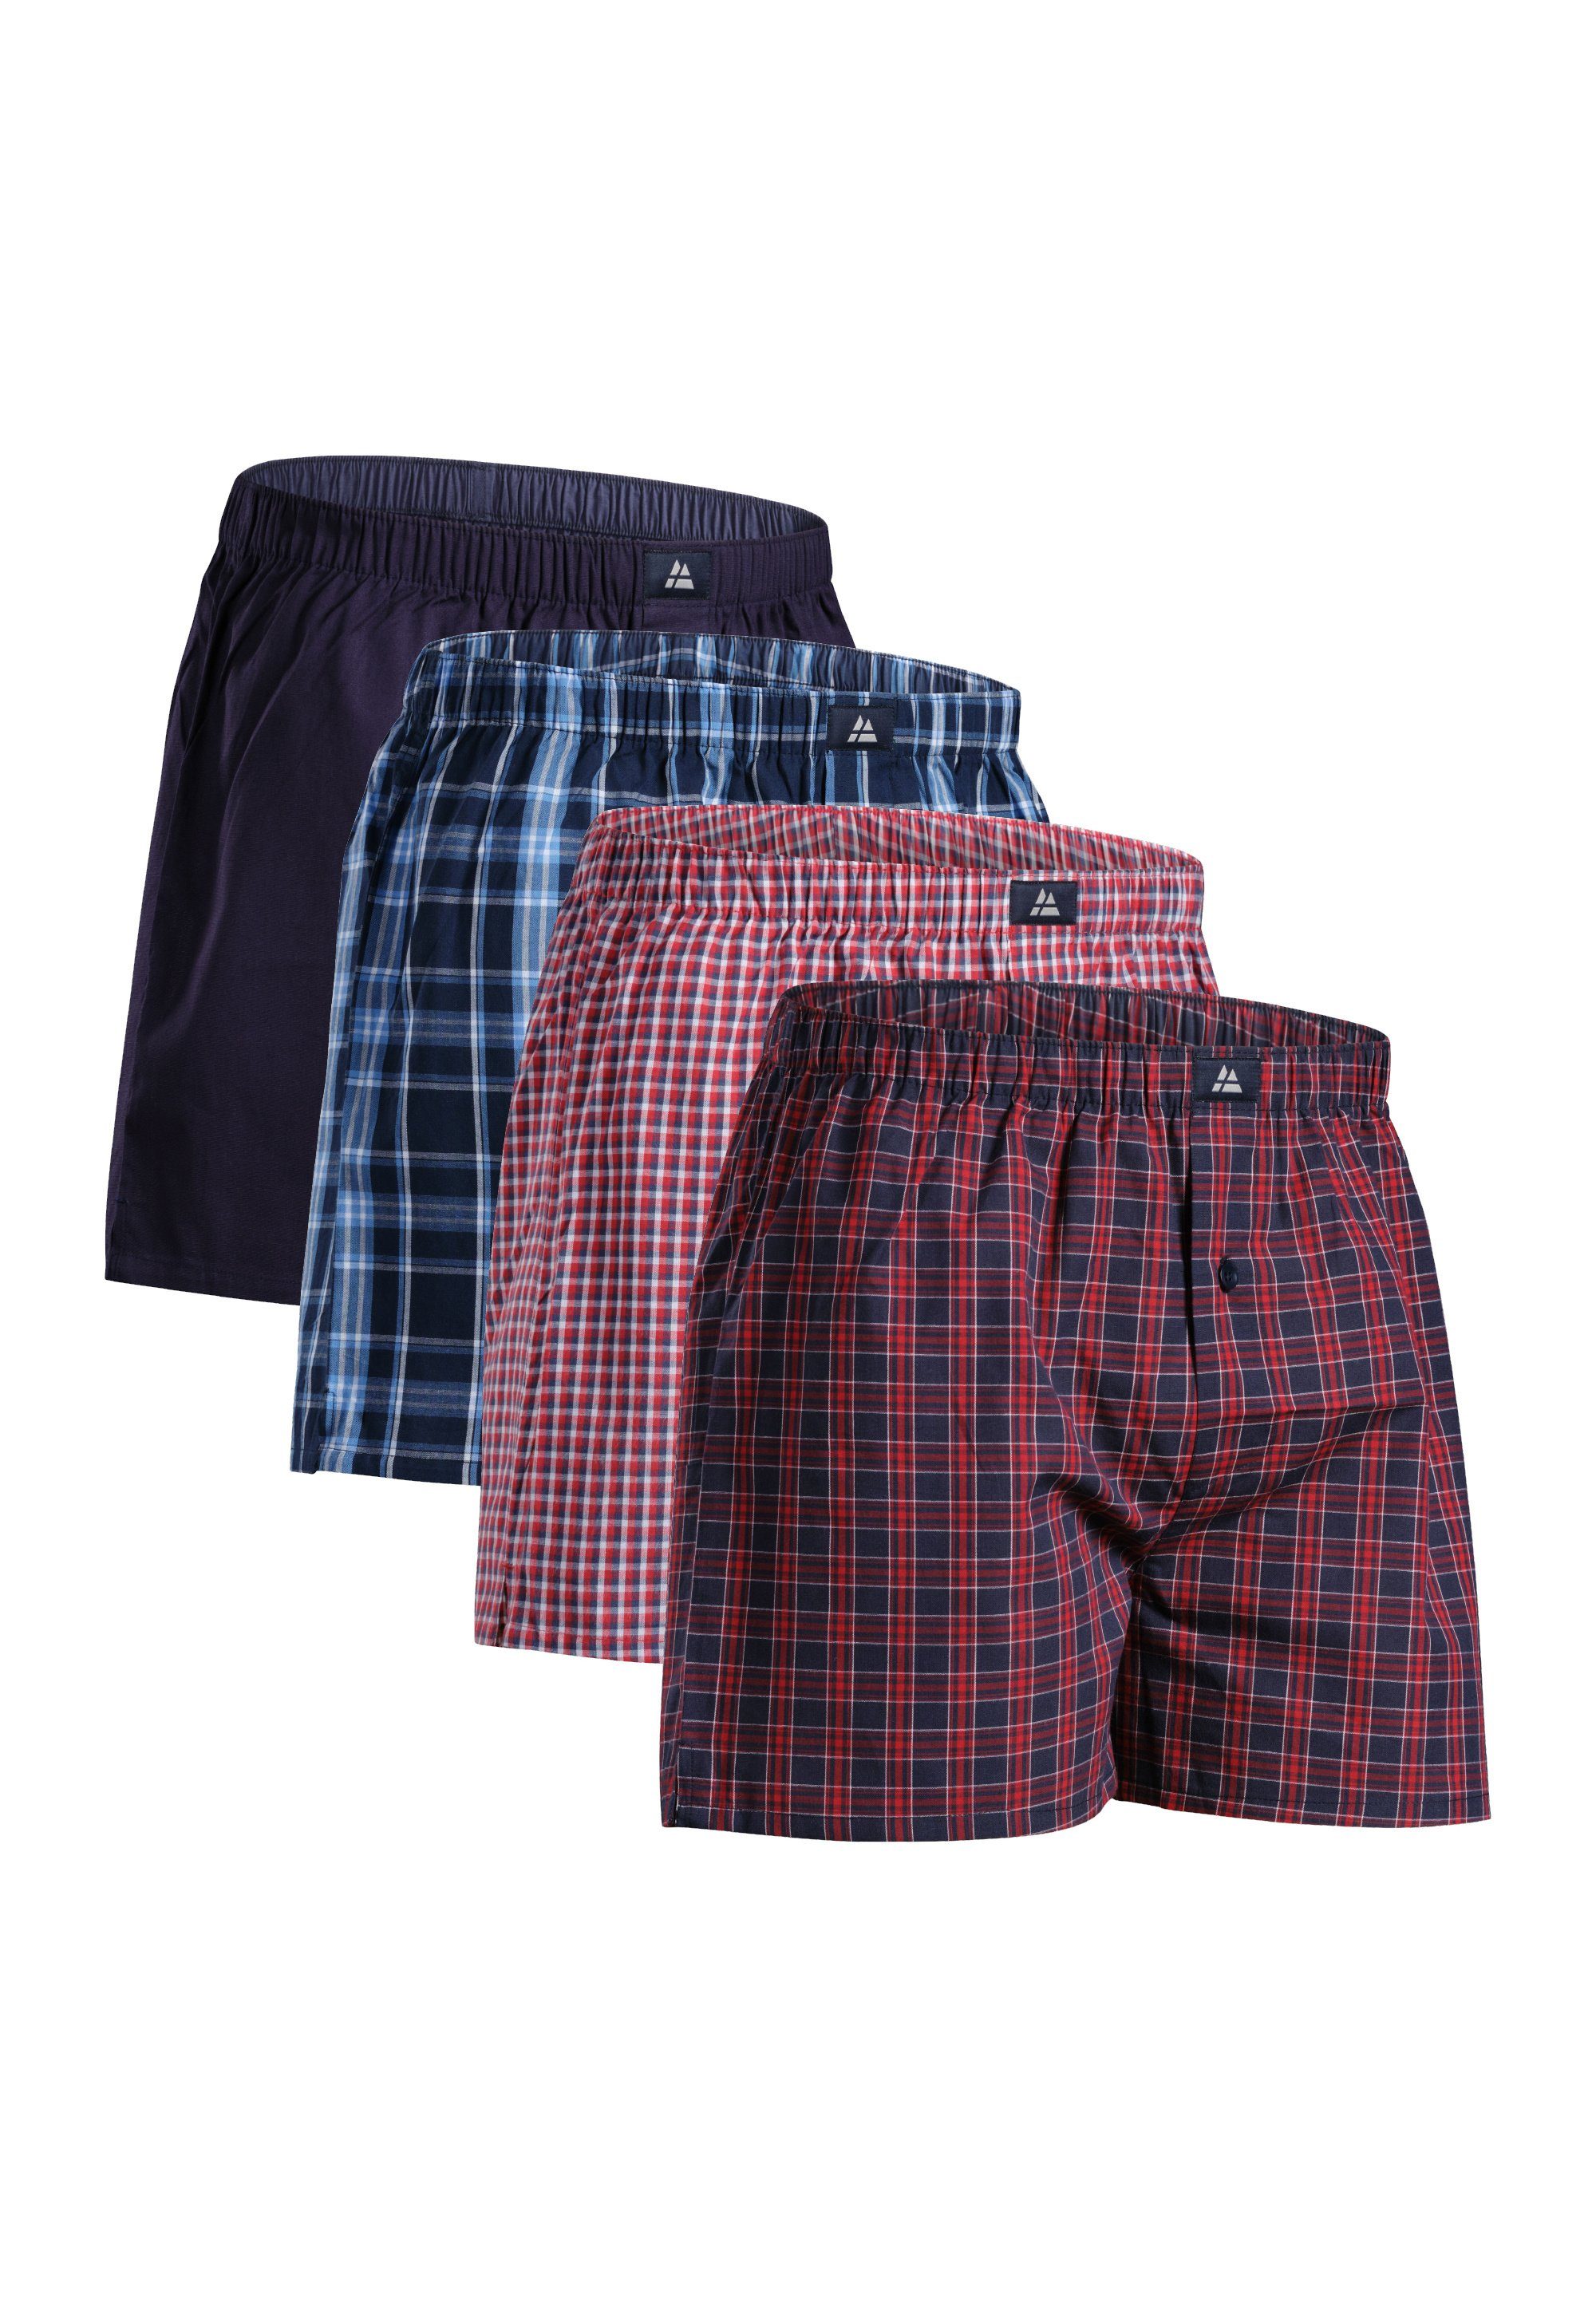 DANISH ENDURANCE Weiter Boxer Organic Woven Boxers (Packung, 4-St) 100% Baumwolle blue/red mix